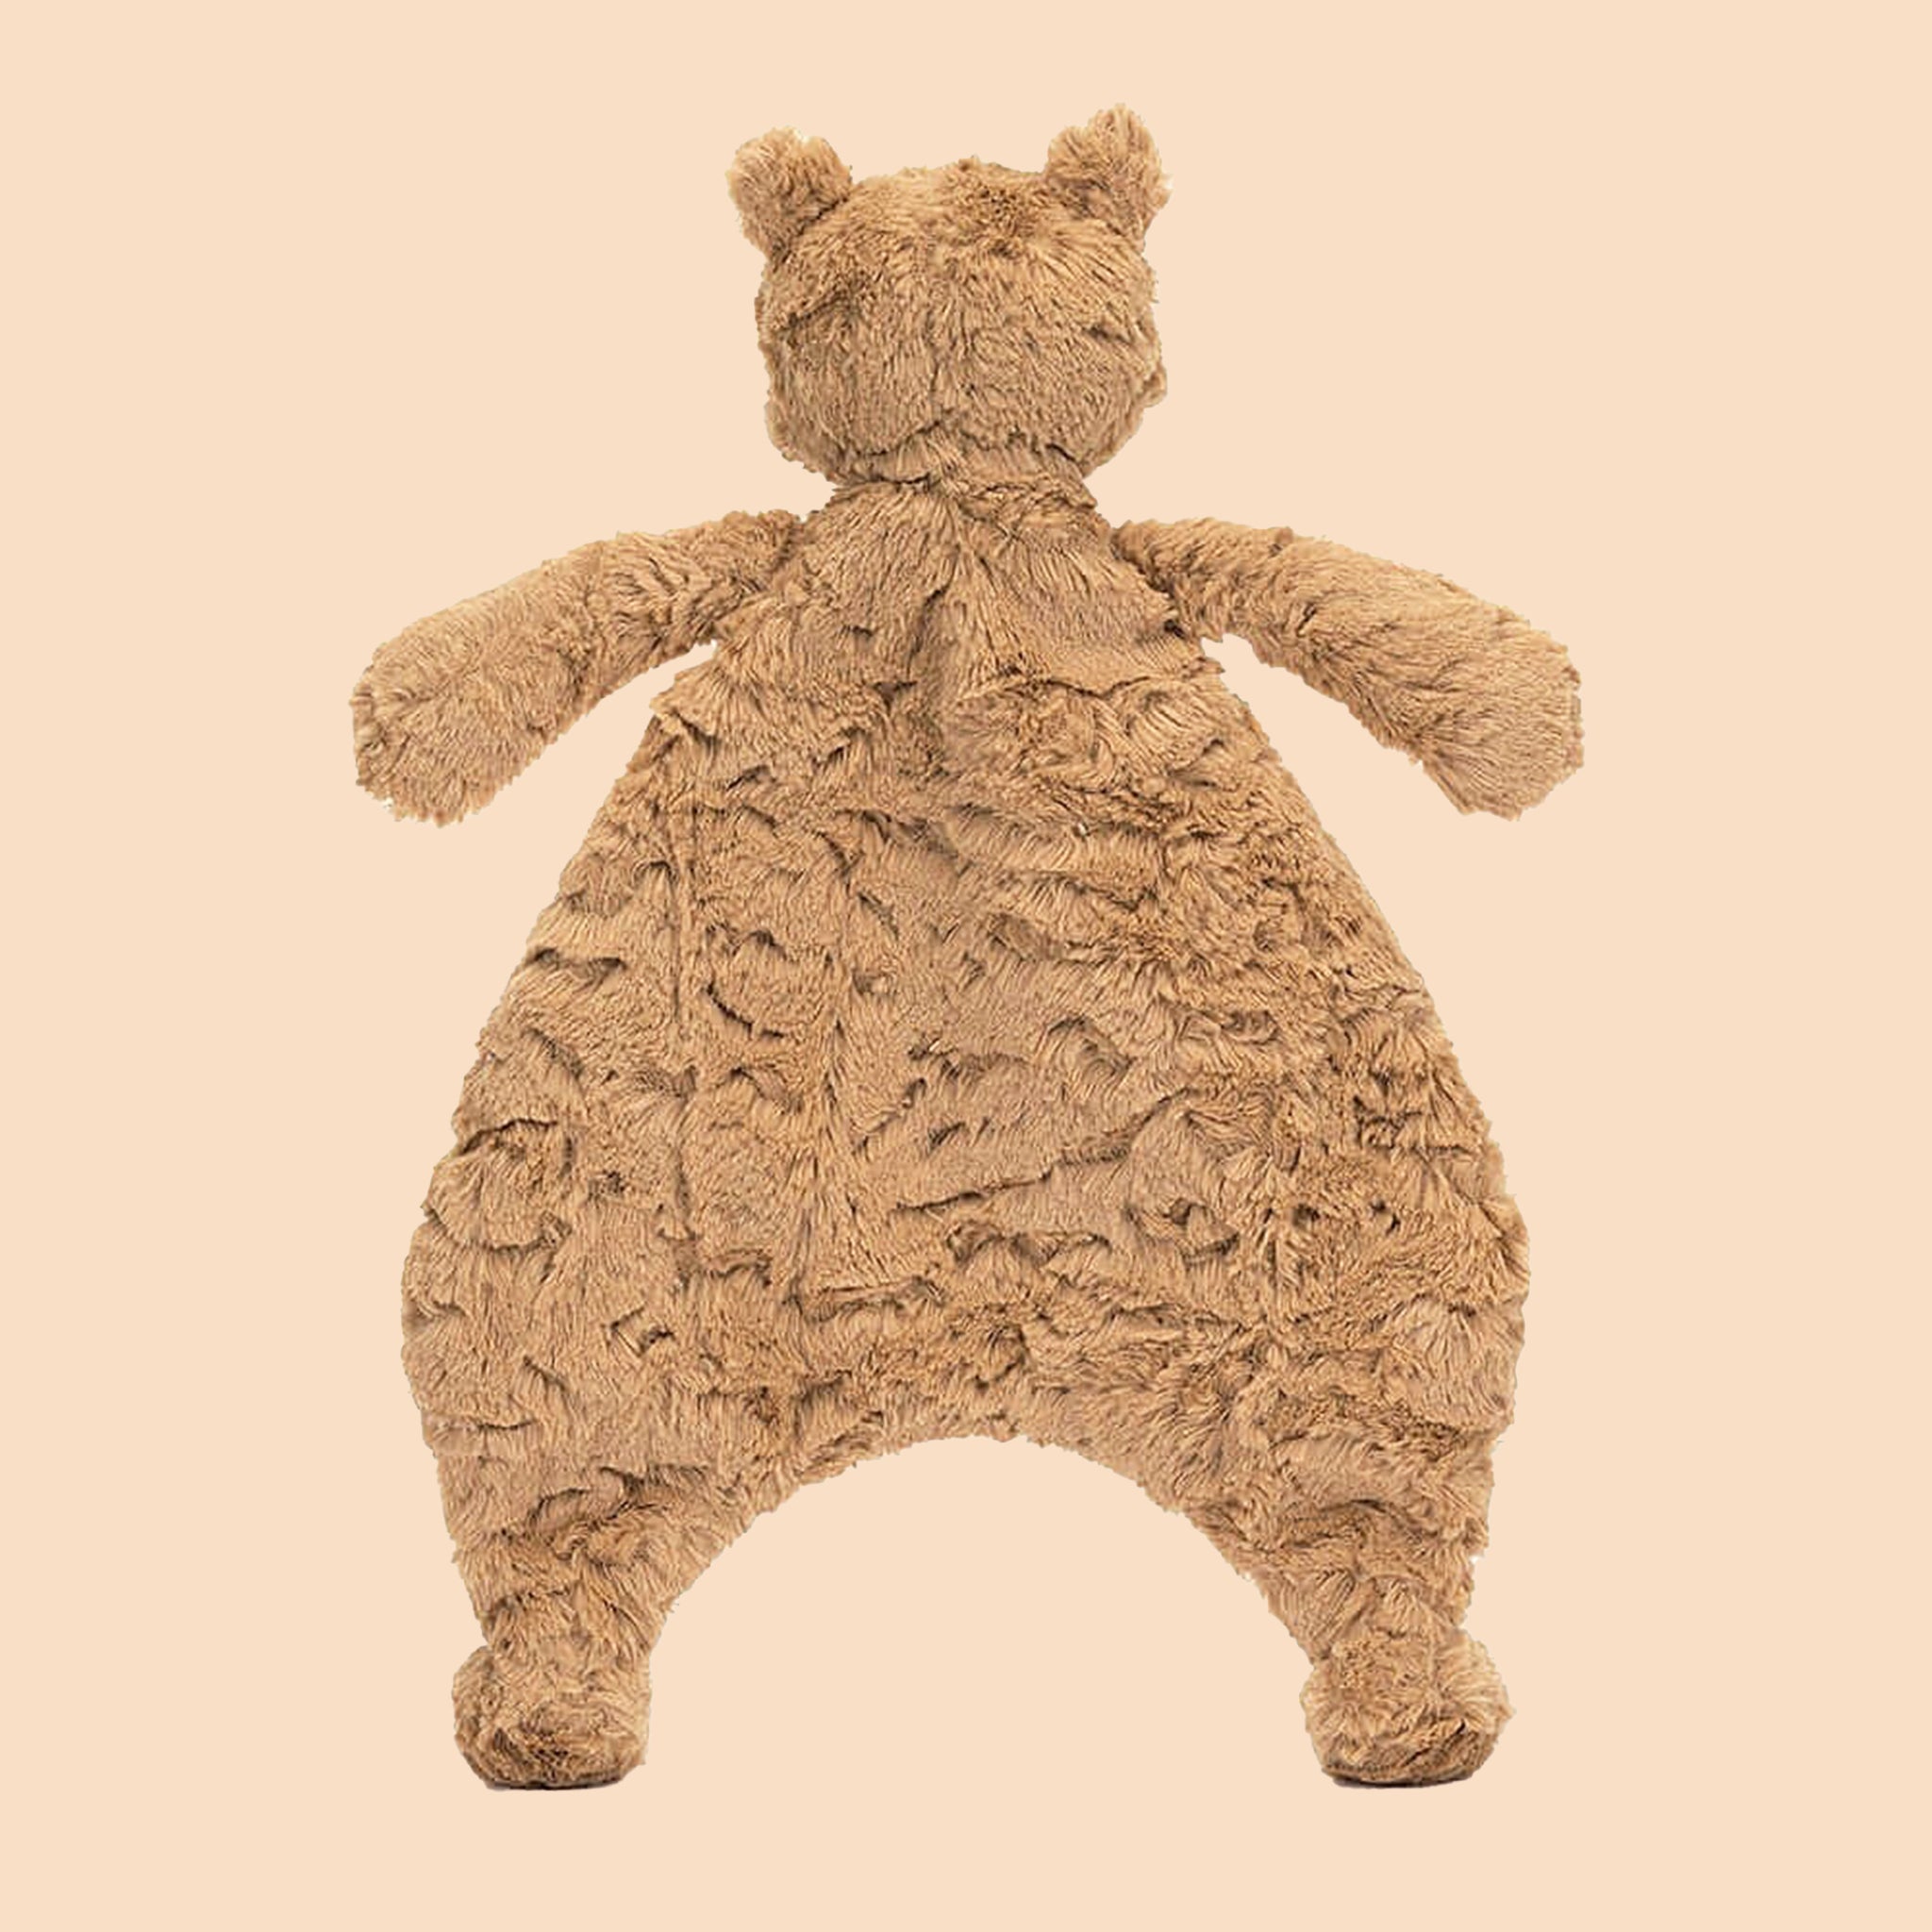 On a tan background is a stuffed toy bear head attached to a furry blanket shaped like a the bear's shape.